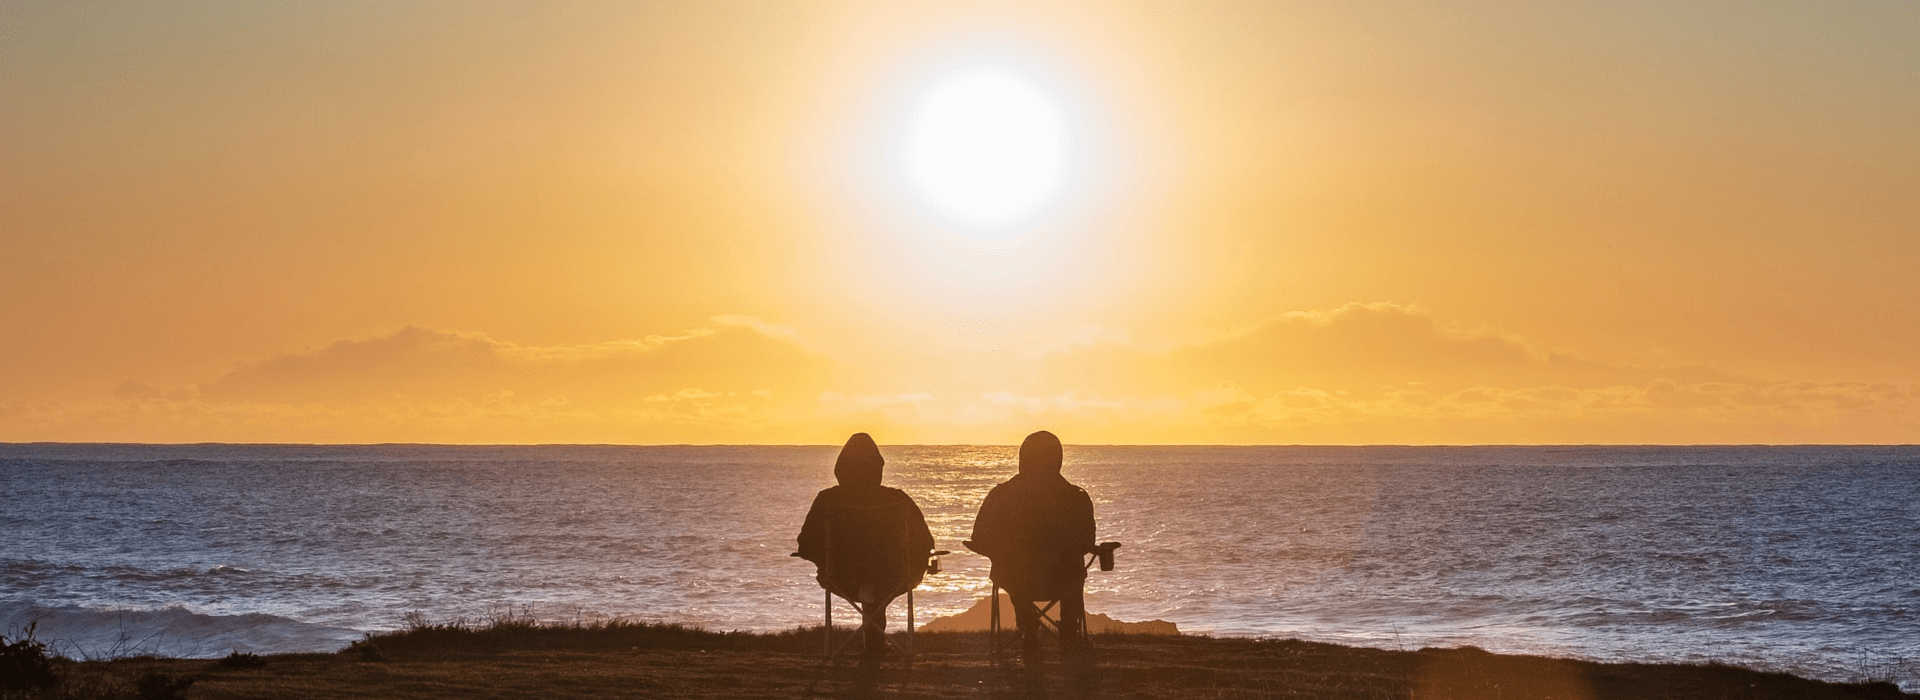 couple looking out over water at sunset